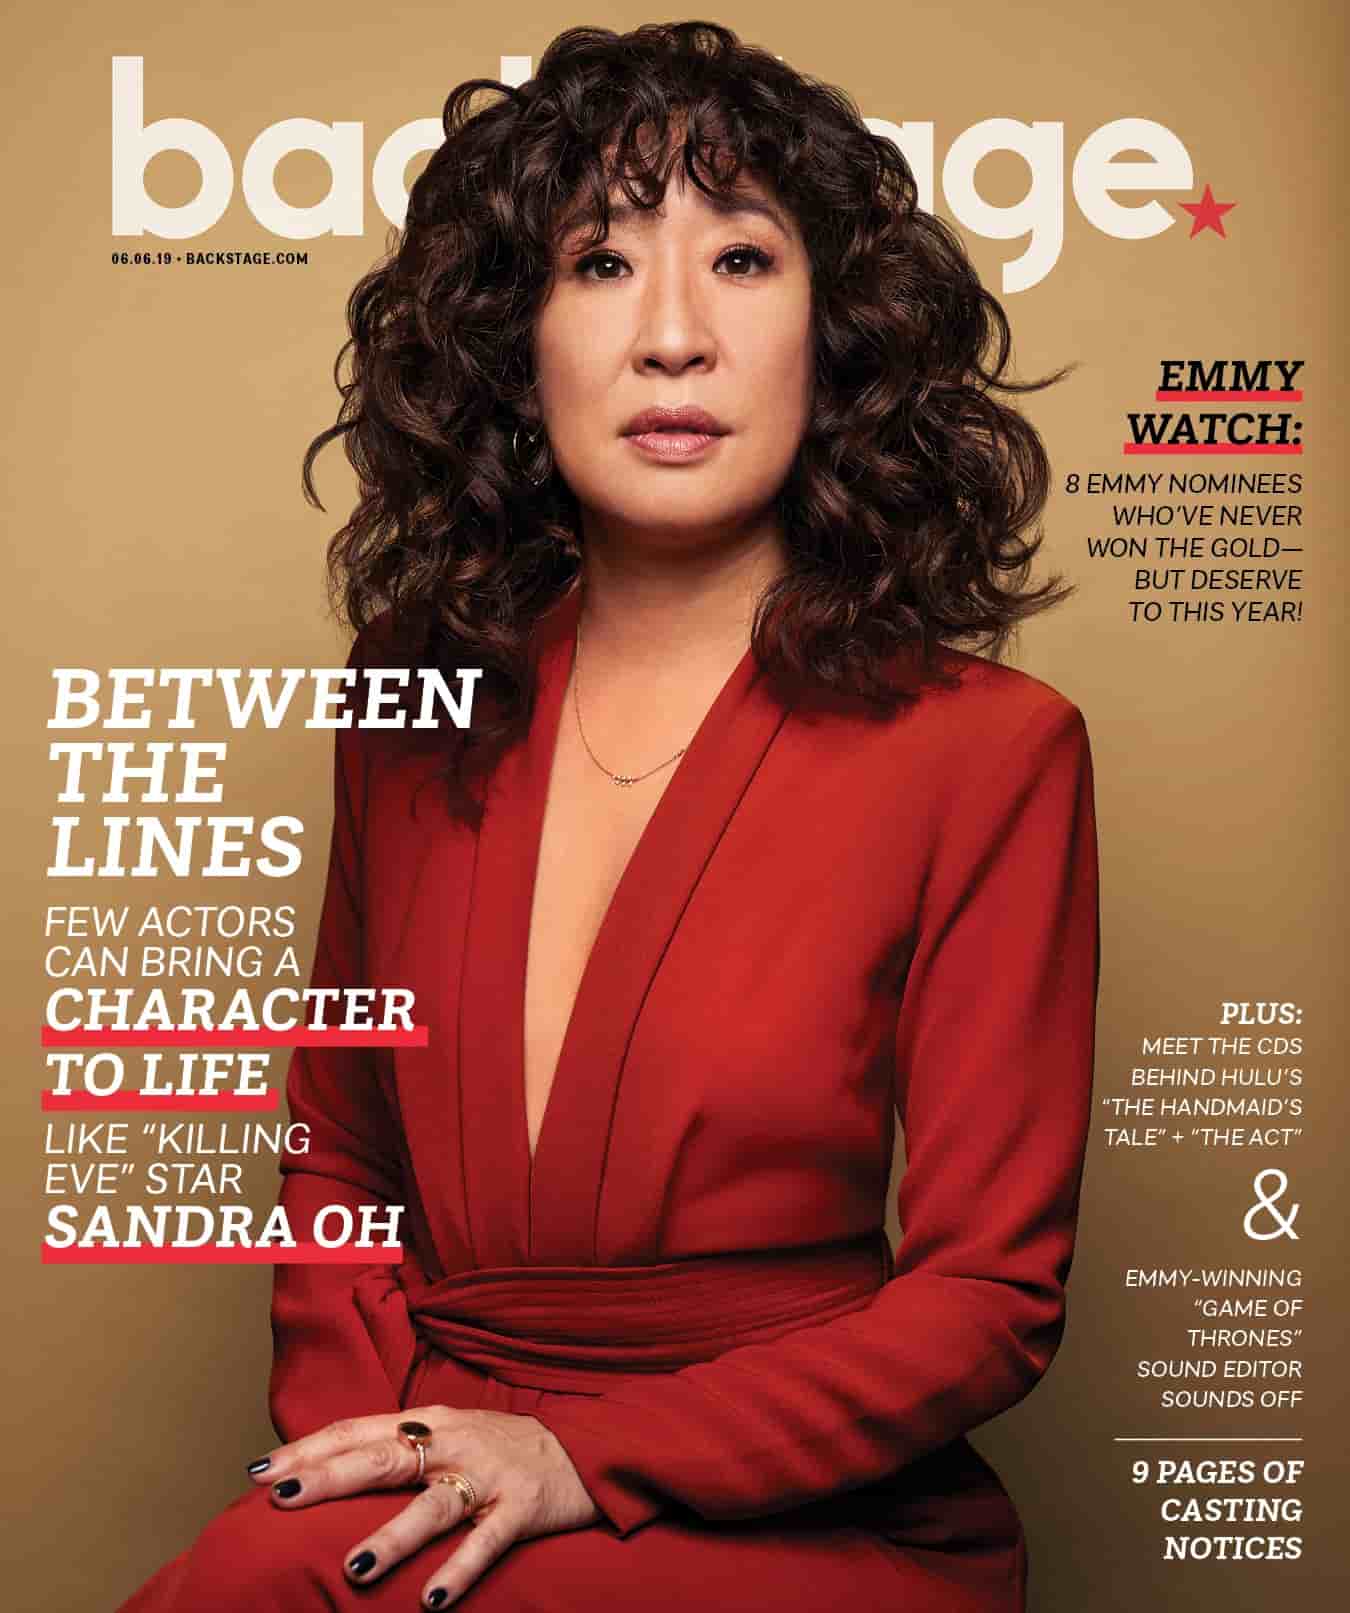 Image of Sandra Oh as a well-known actress and model